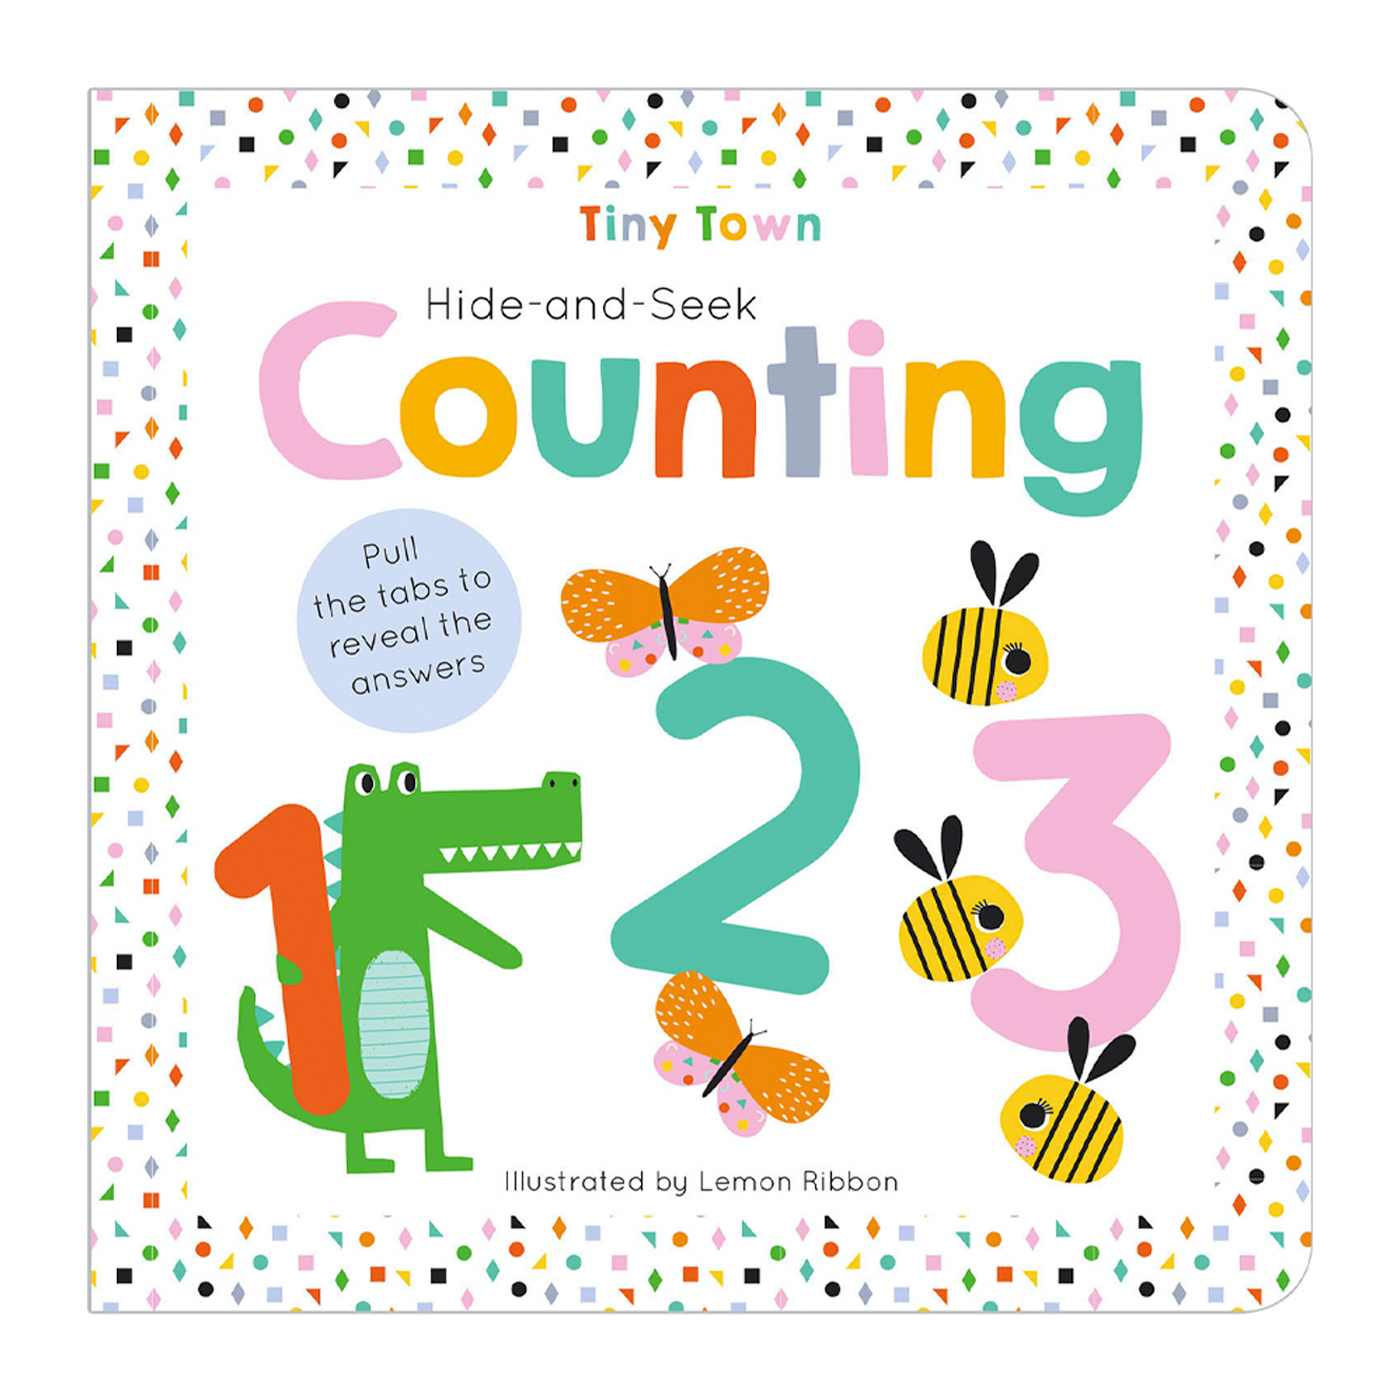  Hide-and-Seek Counting Book